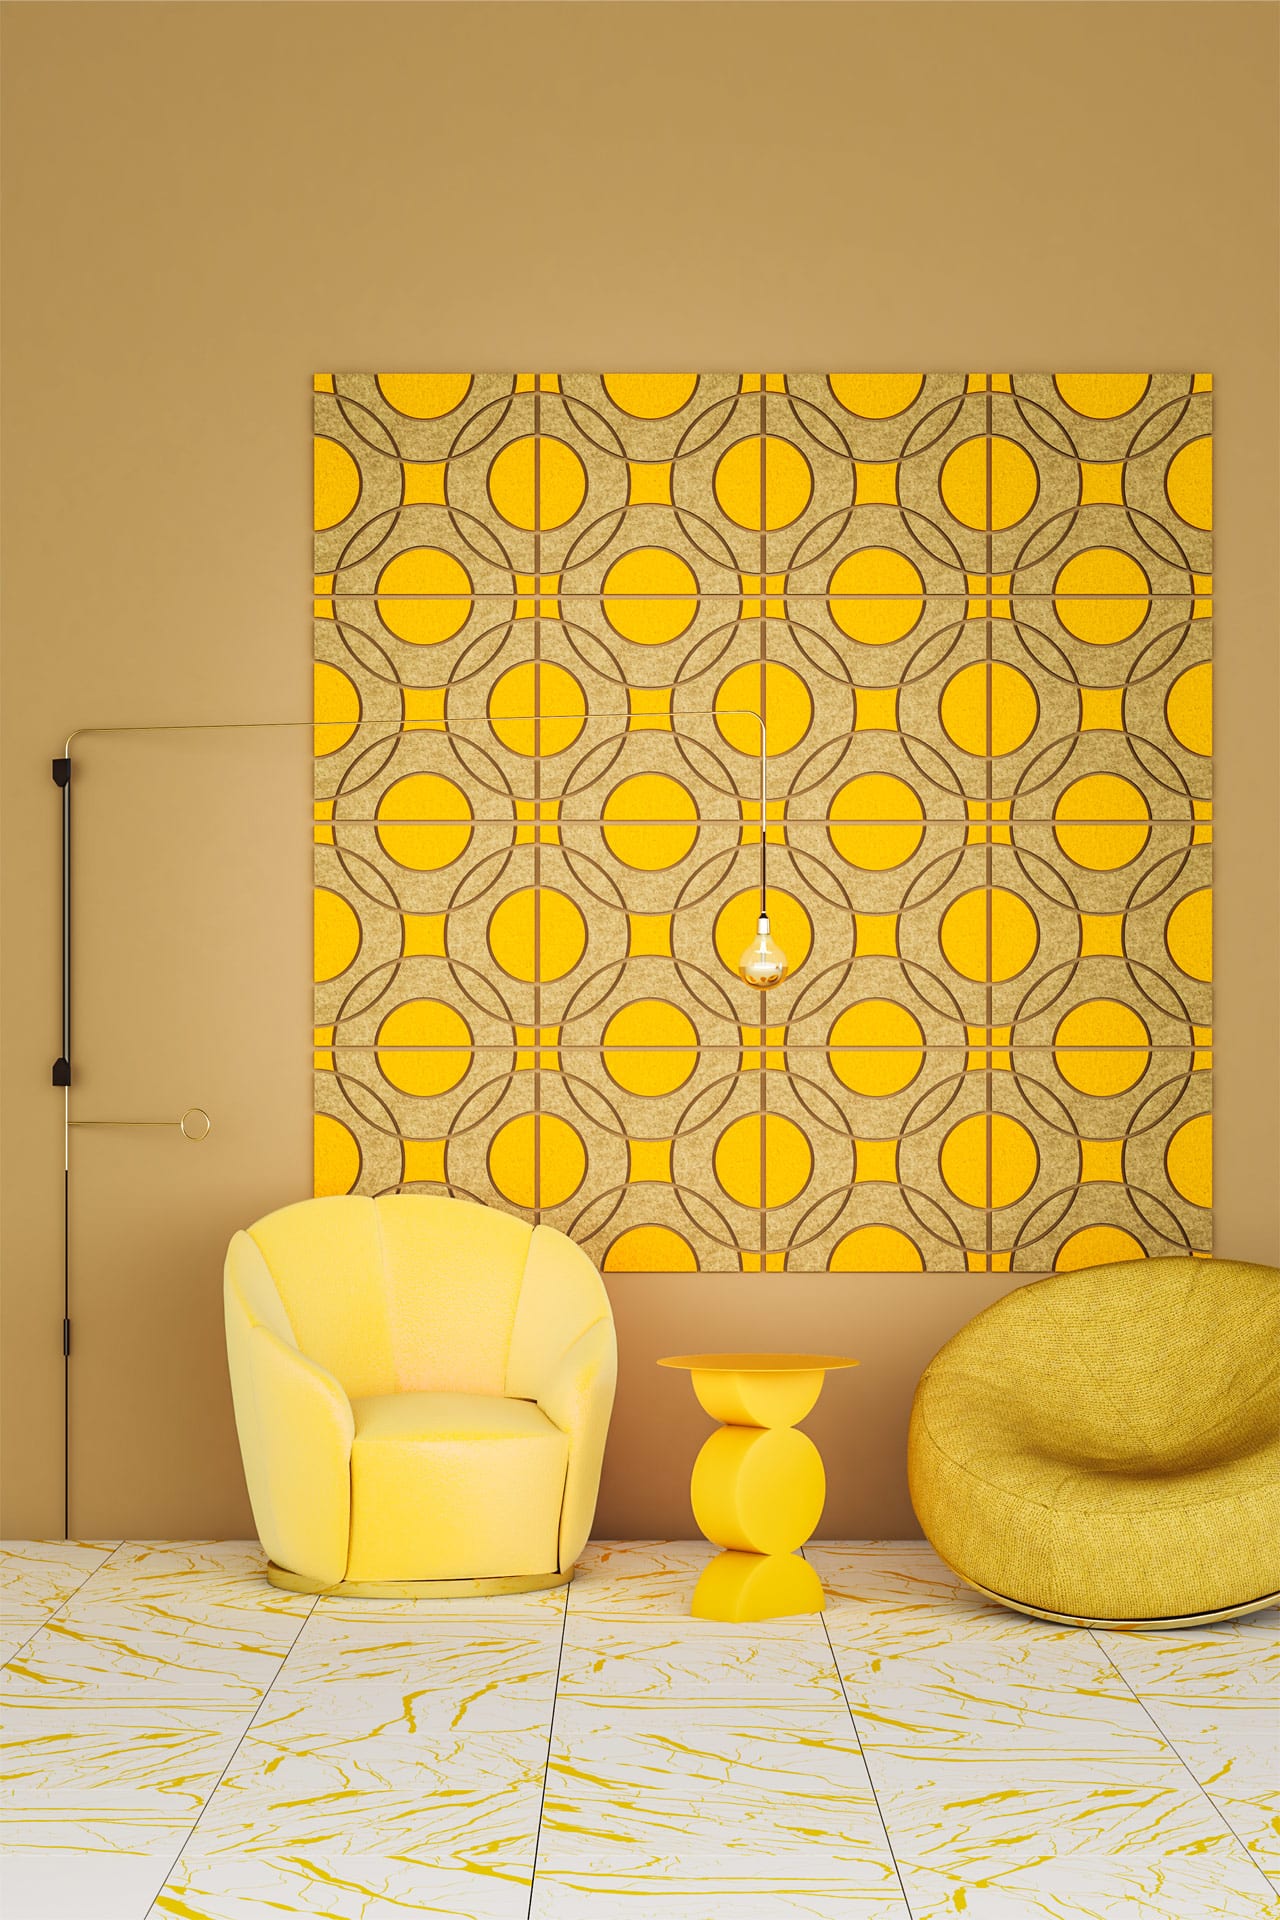 Composition of decorative acoustic panels on the wall in a waiting room